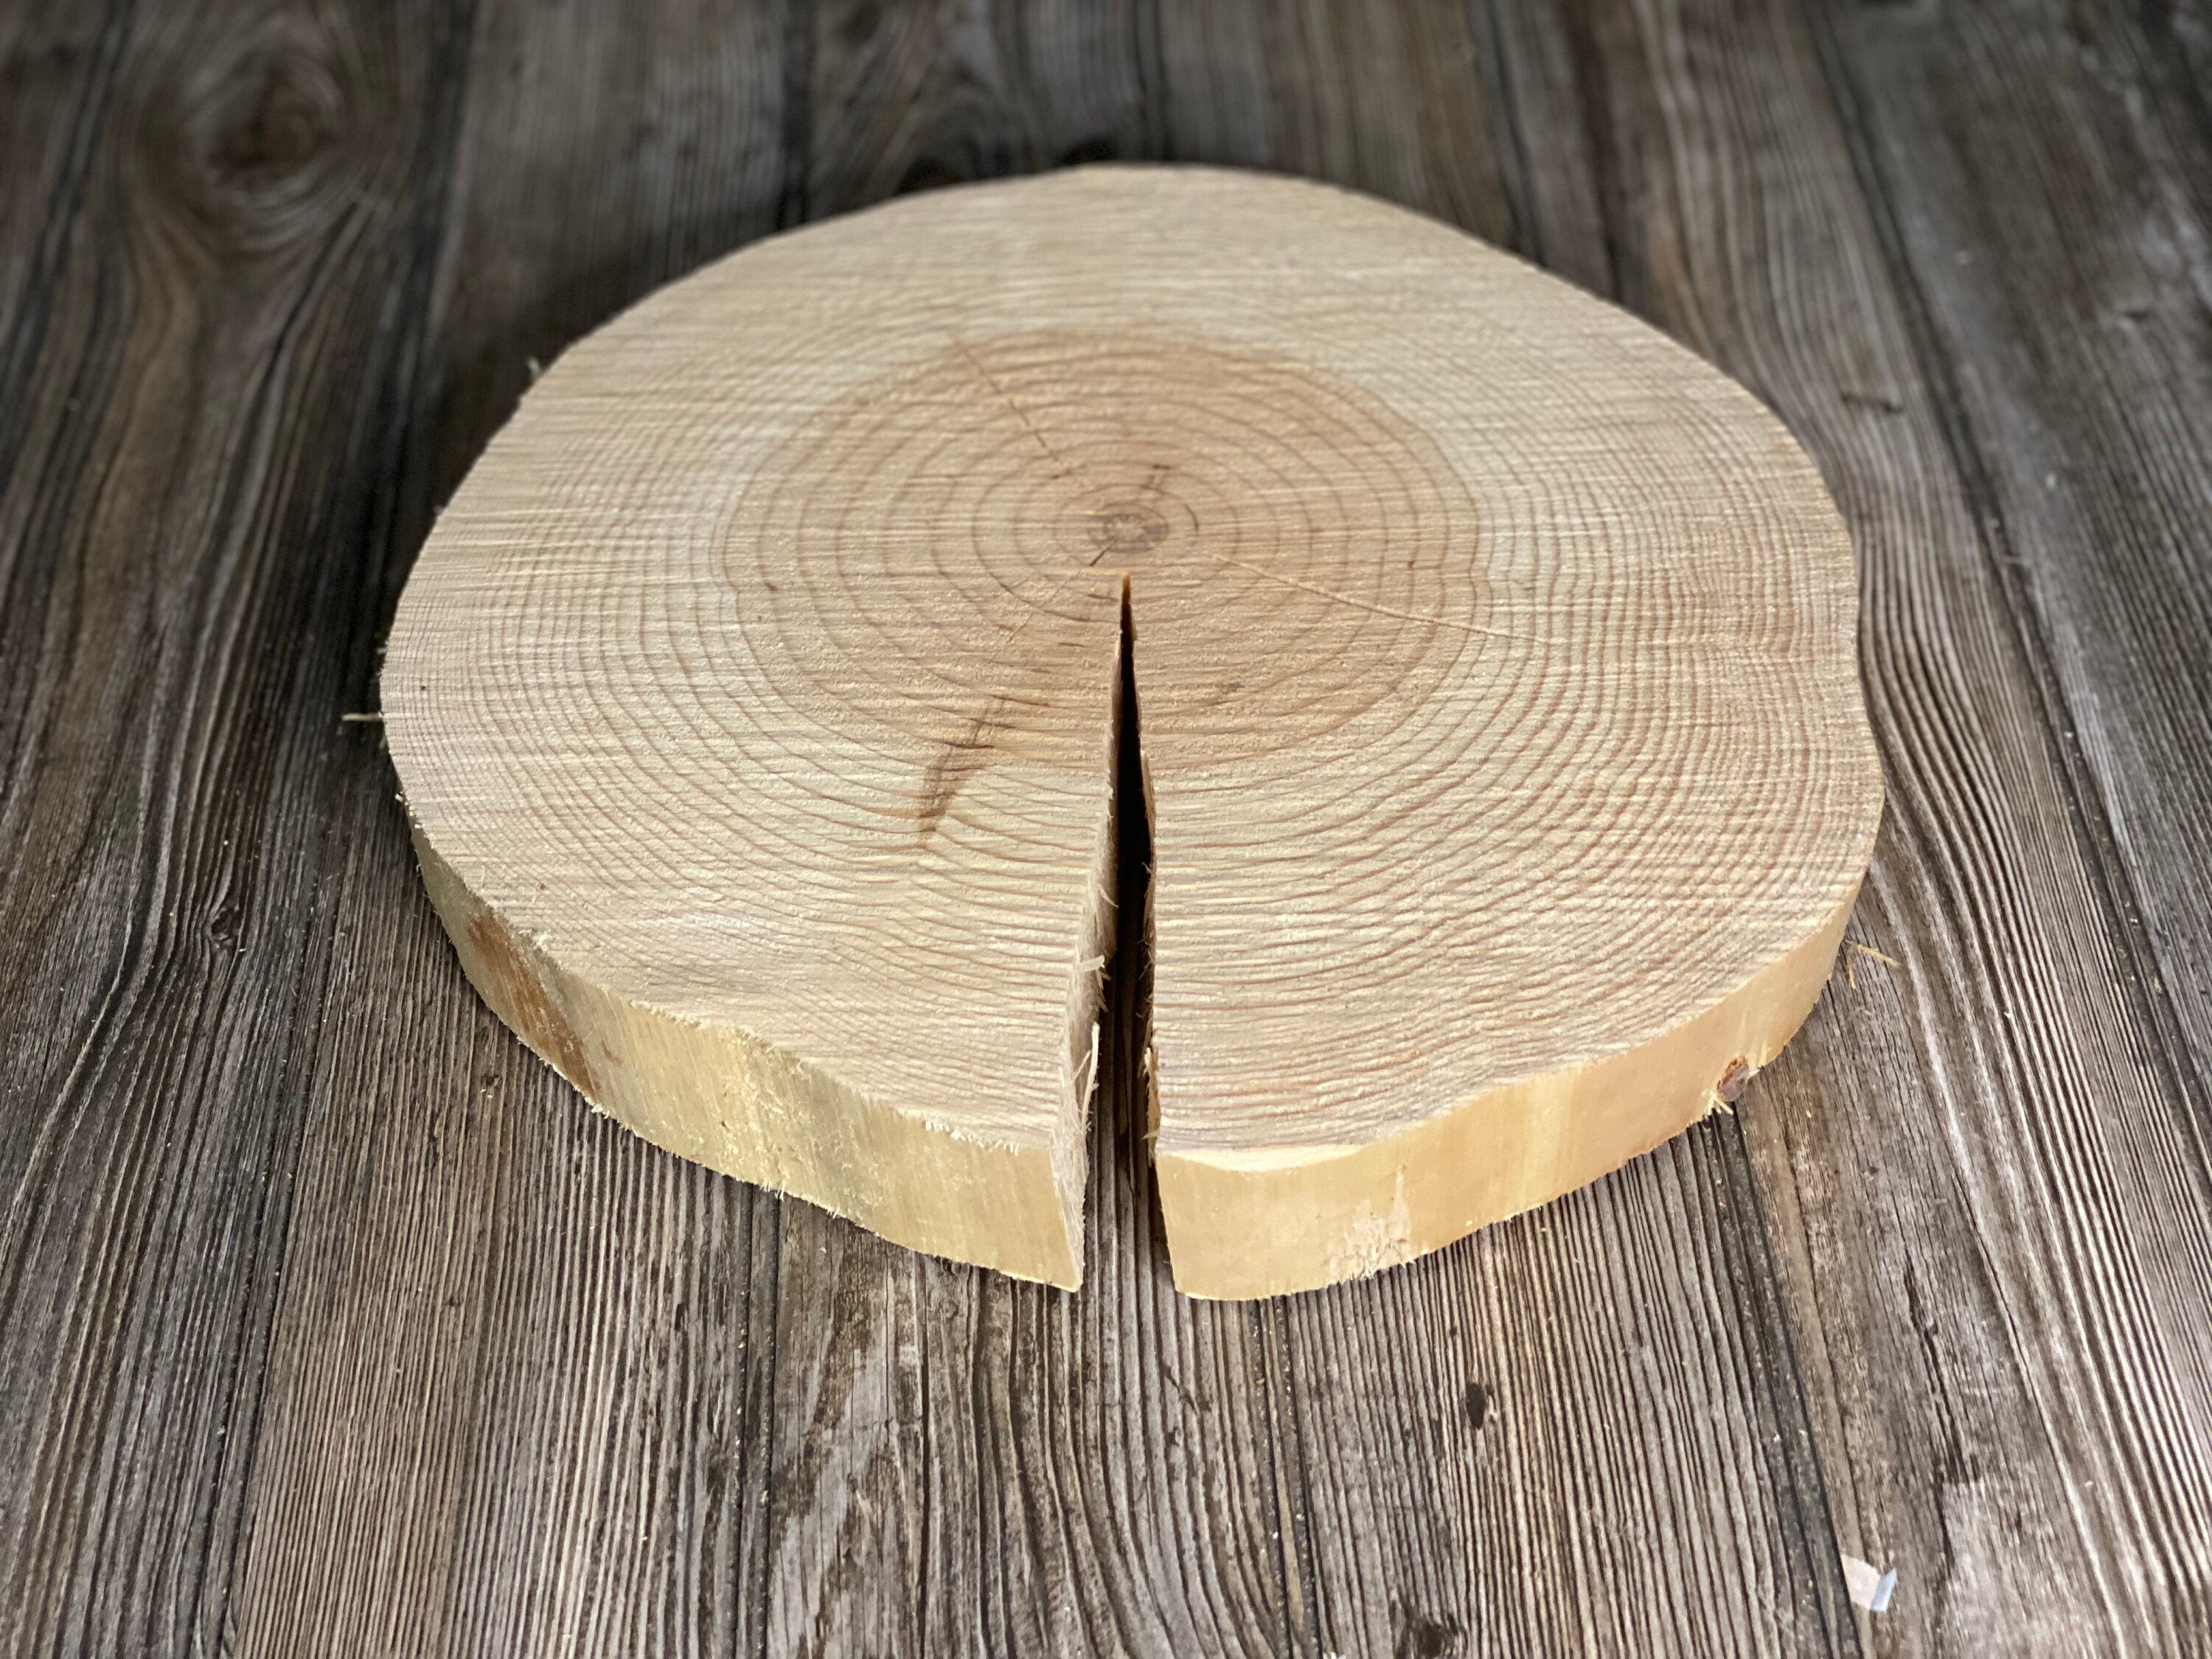 Pine Slice, Approximately 13 Inches Long by 13 Inches Wide and 2 Inches Tall